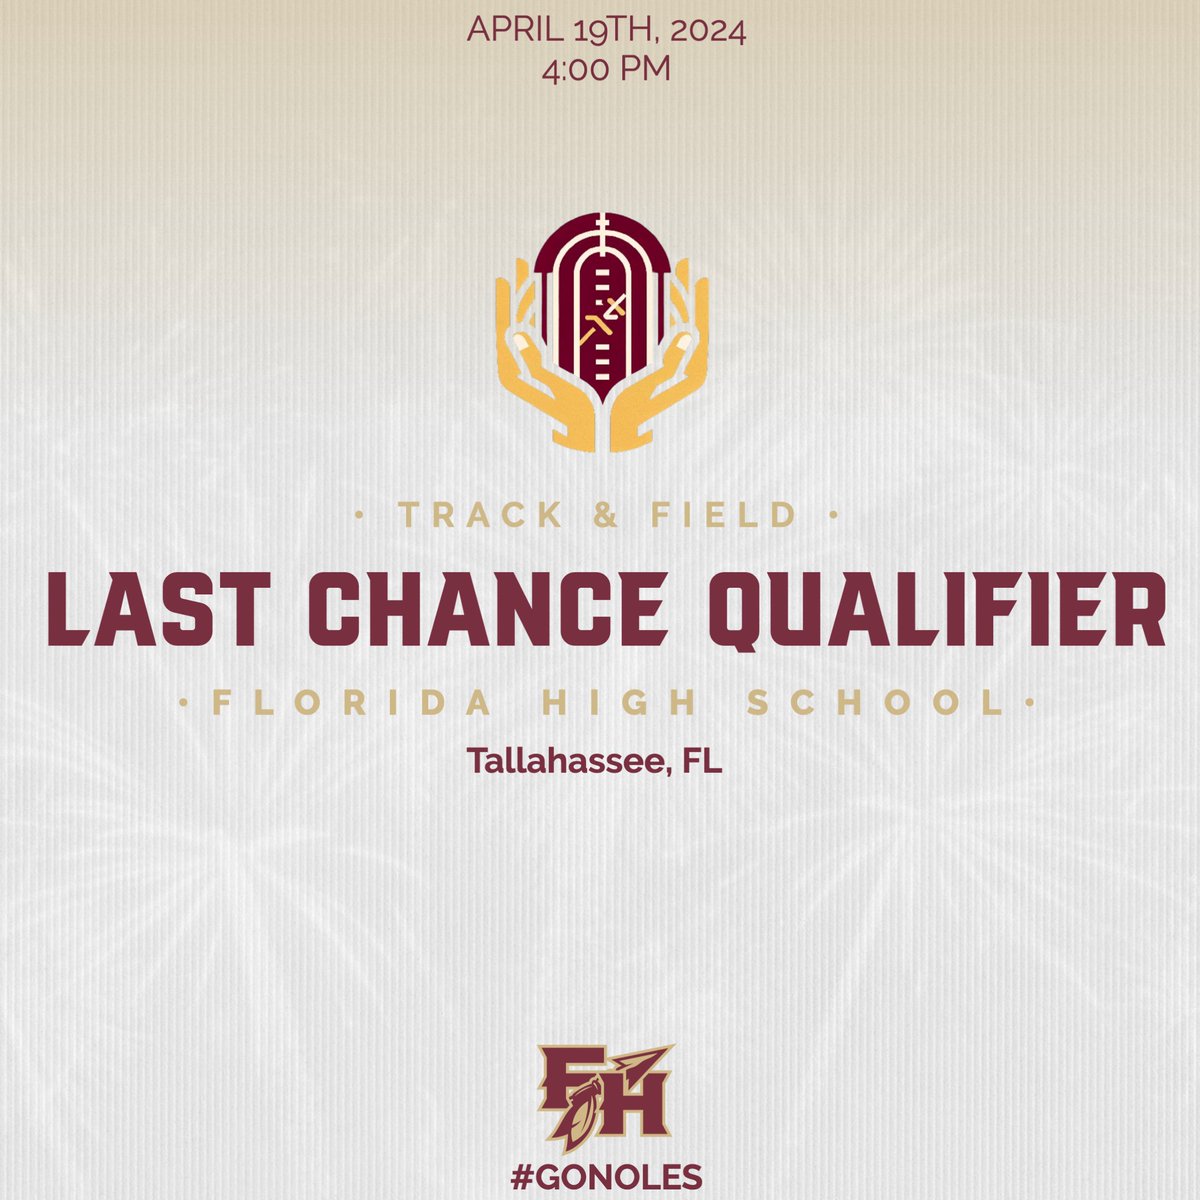 • Meetday • Florida High's Middle School Last Chance Qualifier track meet happens today! Support these athletes, Noles! Let's Go! Time: 4:00 PM Location: Florida High